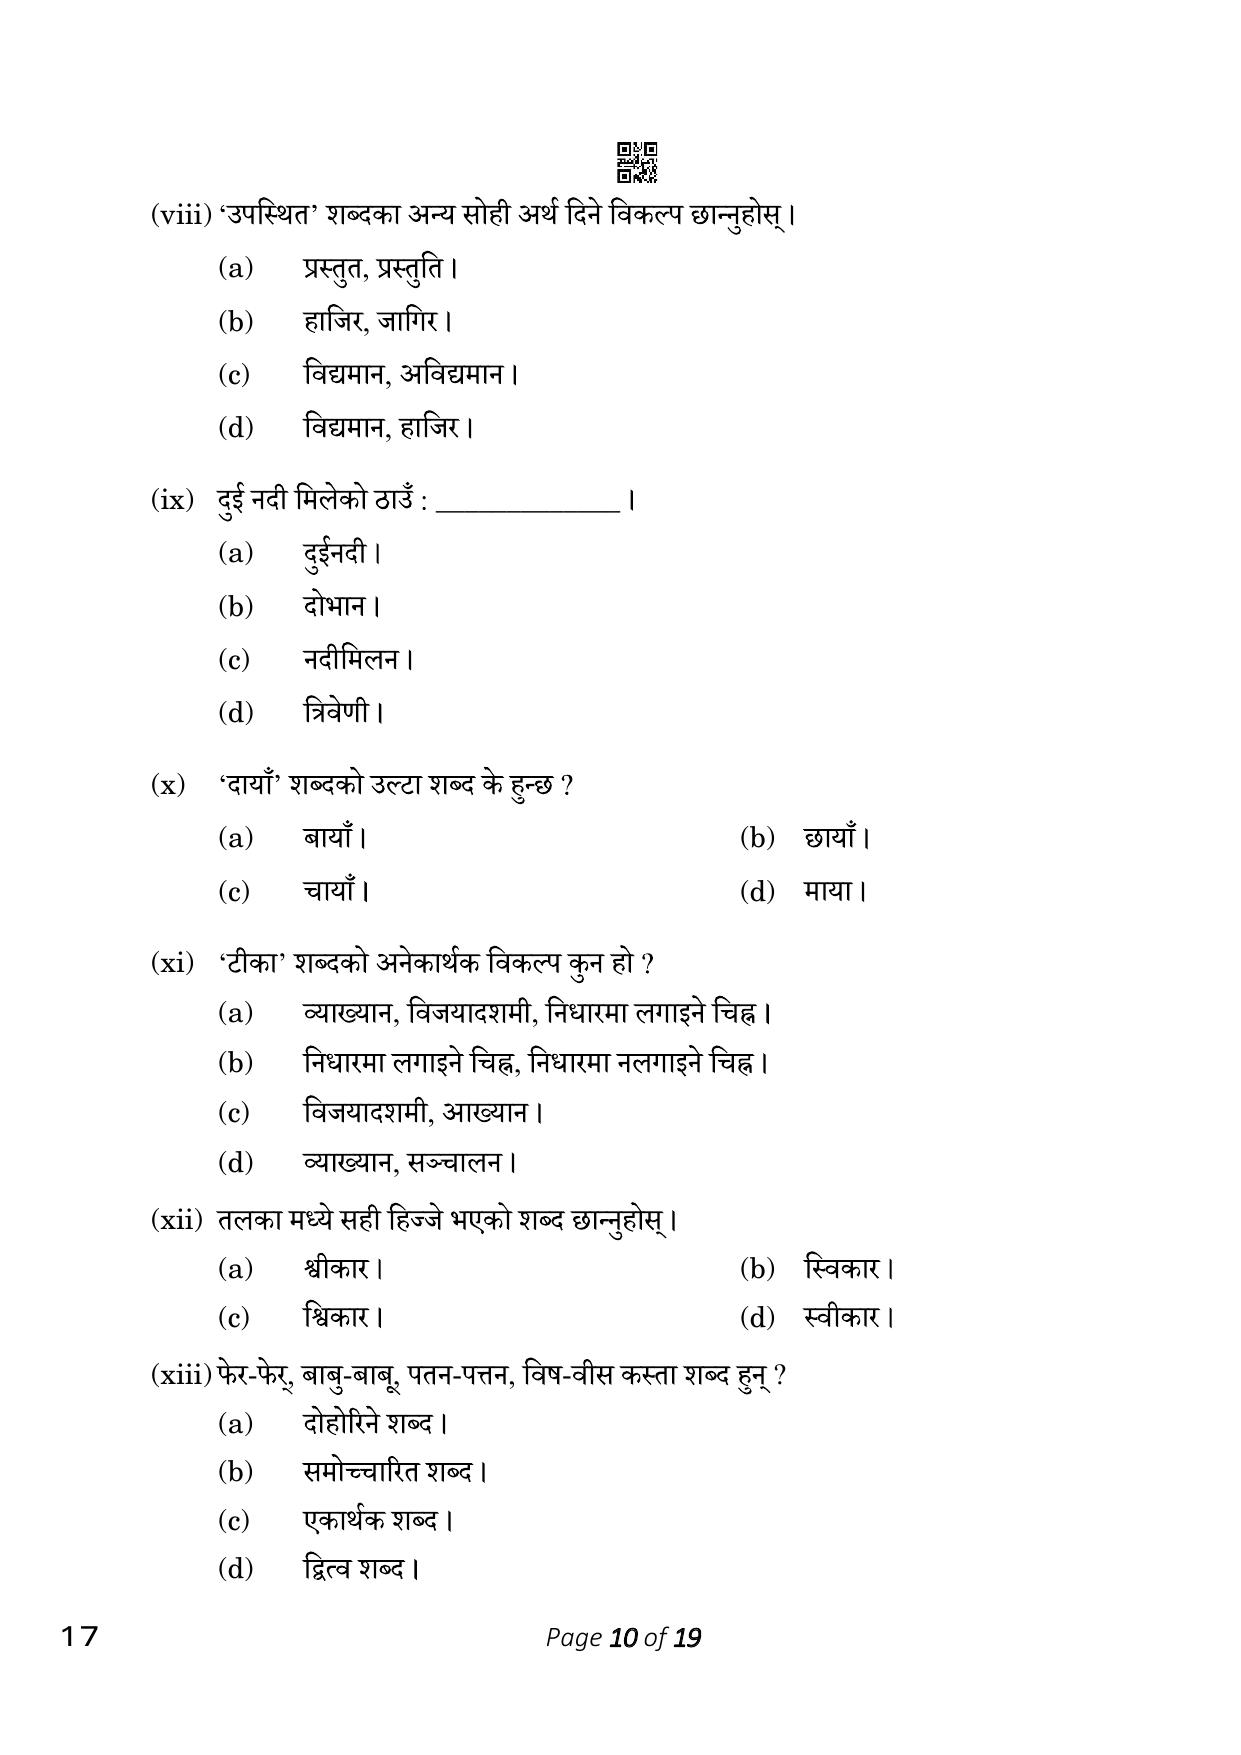 CBSE Class 10 Nepali (Compartment) 2023 Question Paper - Page 10